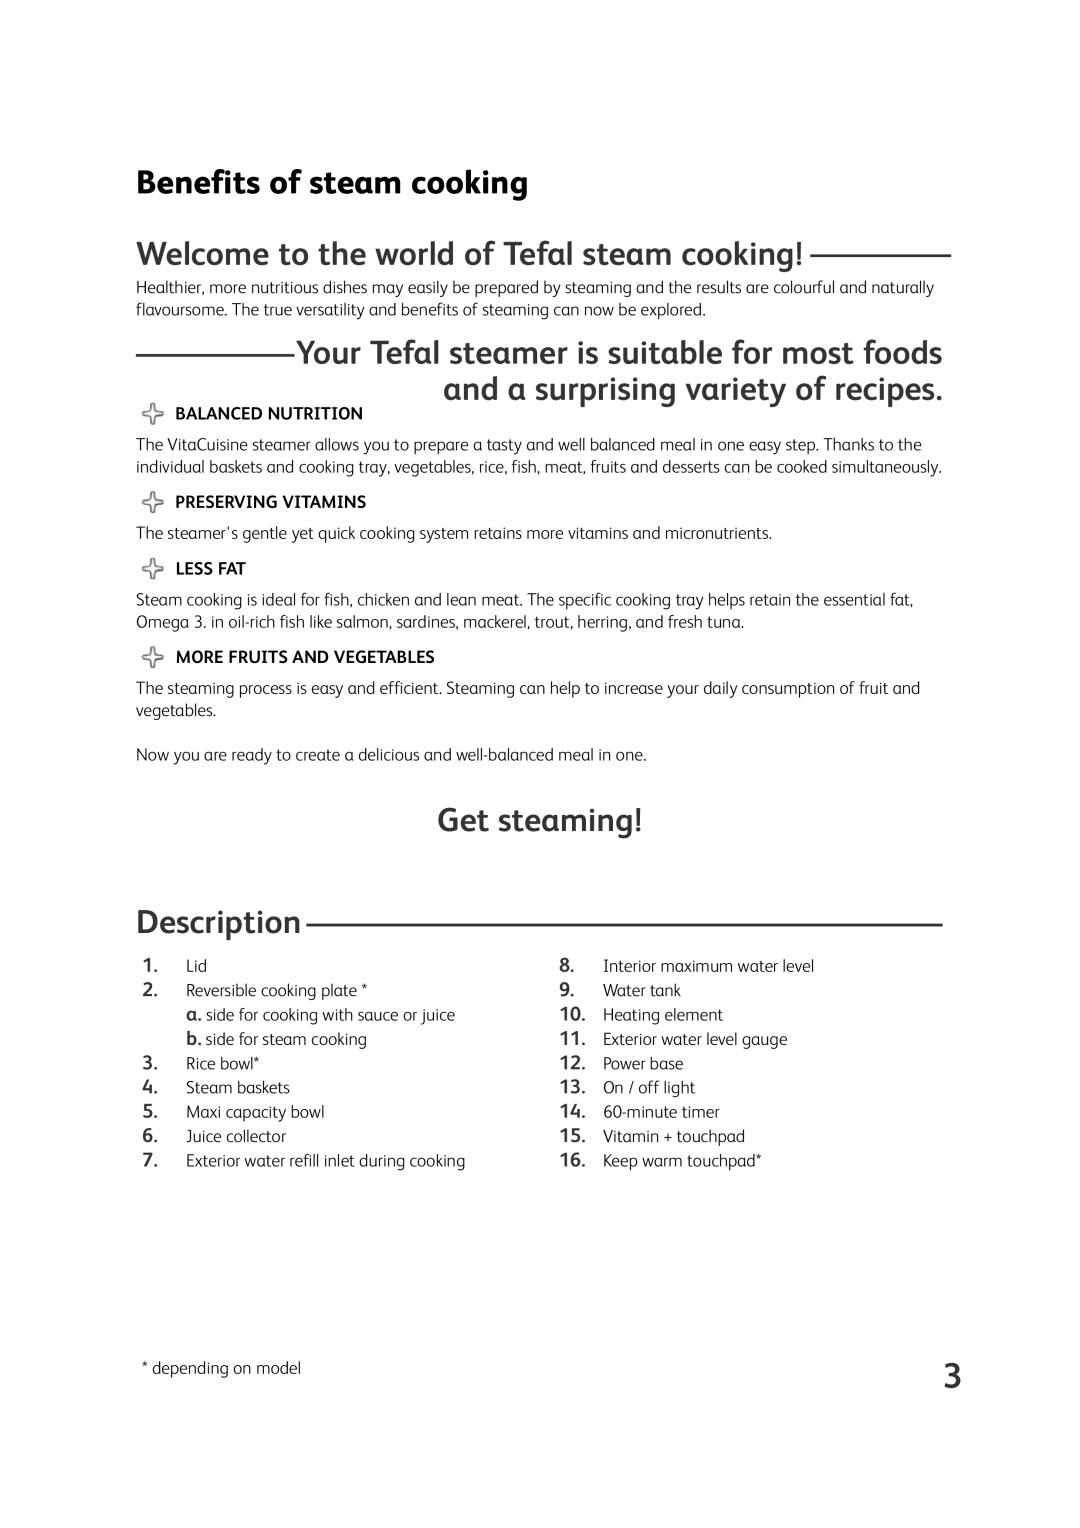 Tefal VS400171 Benefits of steam cooking, Welcome to the world of Tefal steam cooking, Get steaming Description, Less Fat 